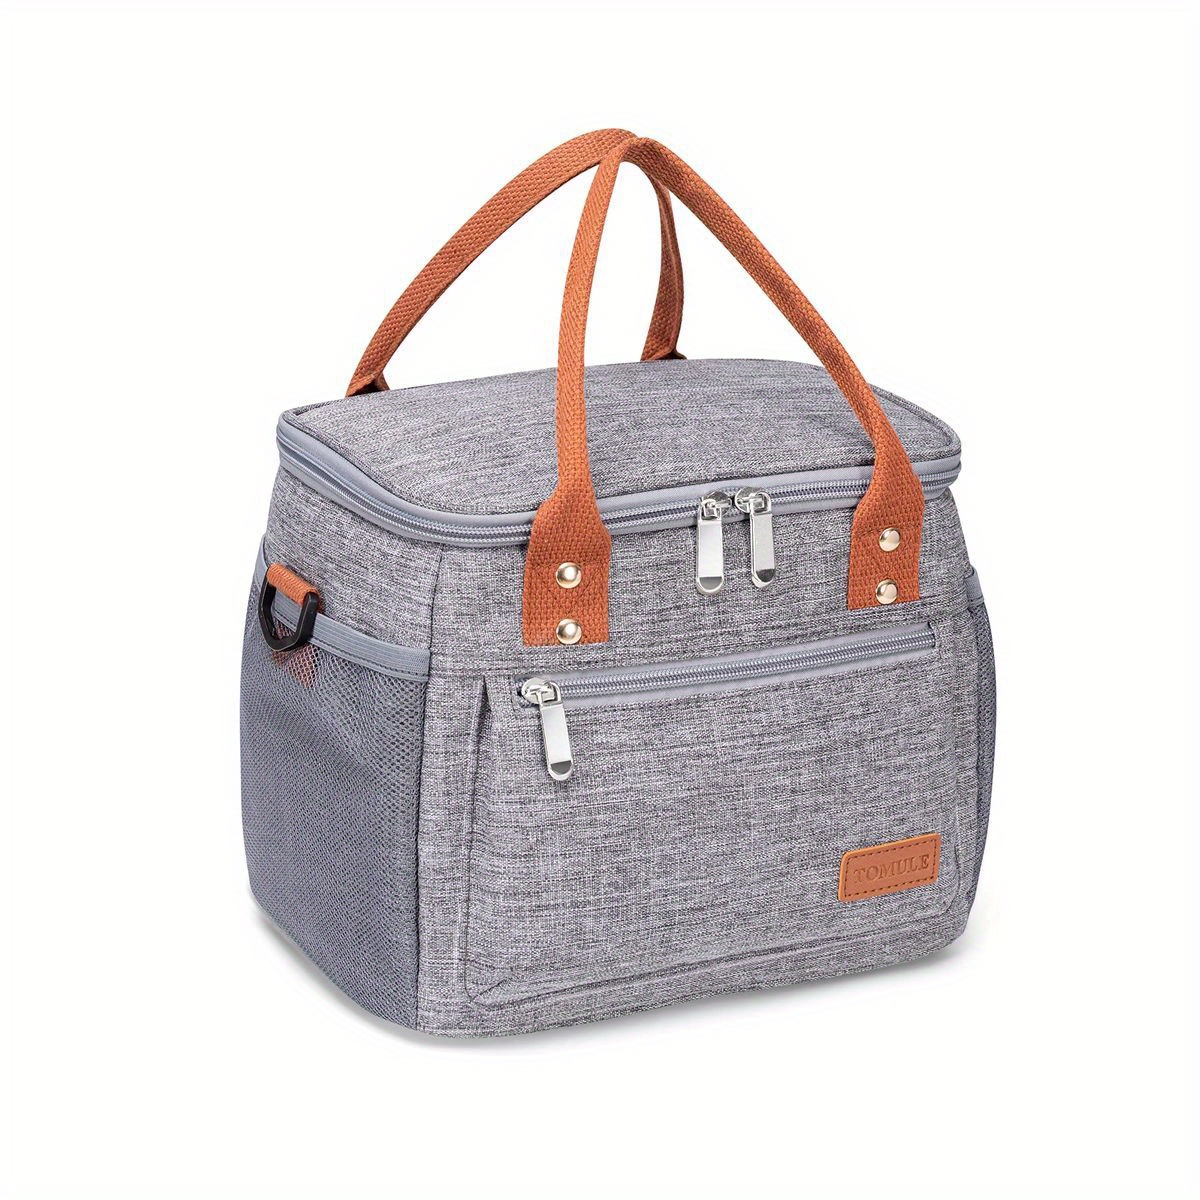 Insulated Lunch Bag for Women/Men - Reusable Lunch Box for Office.